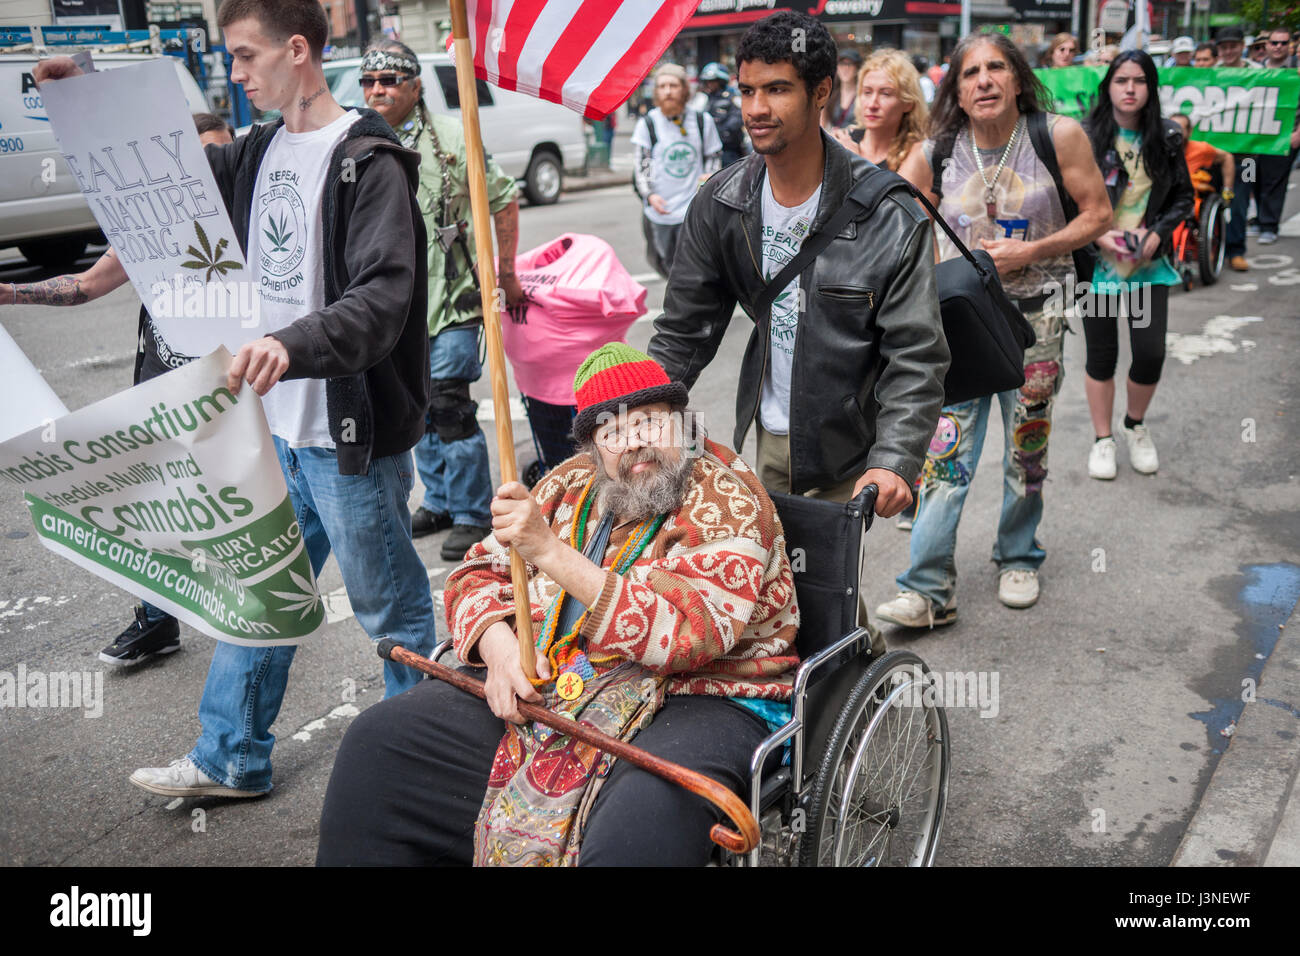 New York, USA. 06th May, 2017. Yippie Pieman Aron Kaye, center, in New York on Saturday, May 6, 2017 at the annual NYC Cannabis Parade. The march included a wide range of demographics from millennials to old-time hippies. The participants in the parade are calling for the legalization of marijuana for medical treatment and for recreational uses. ( © Richard B. Levine) Credit: Richard Levine/Alamy Live News Stock Photo